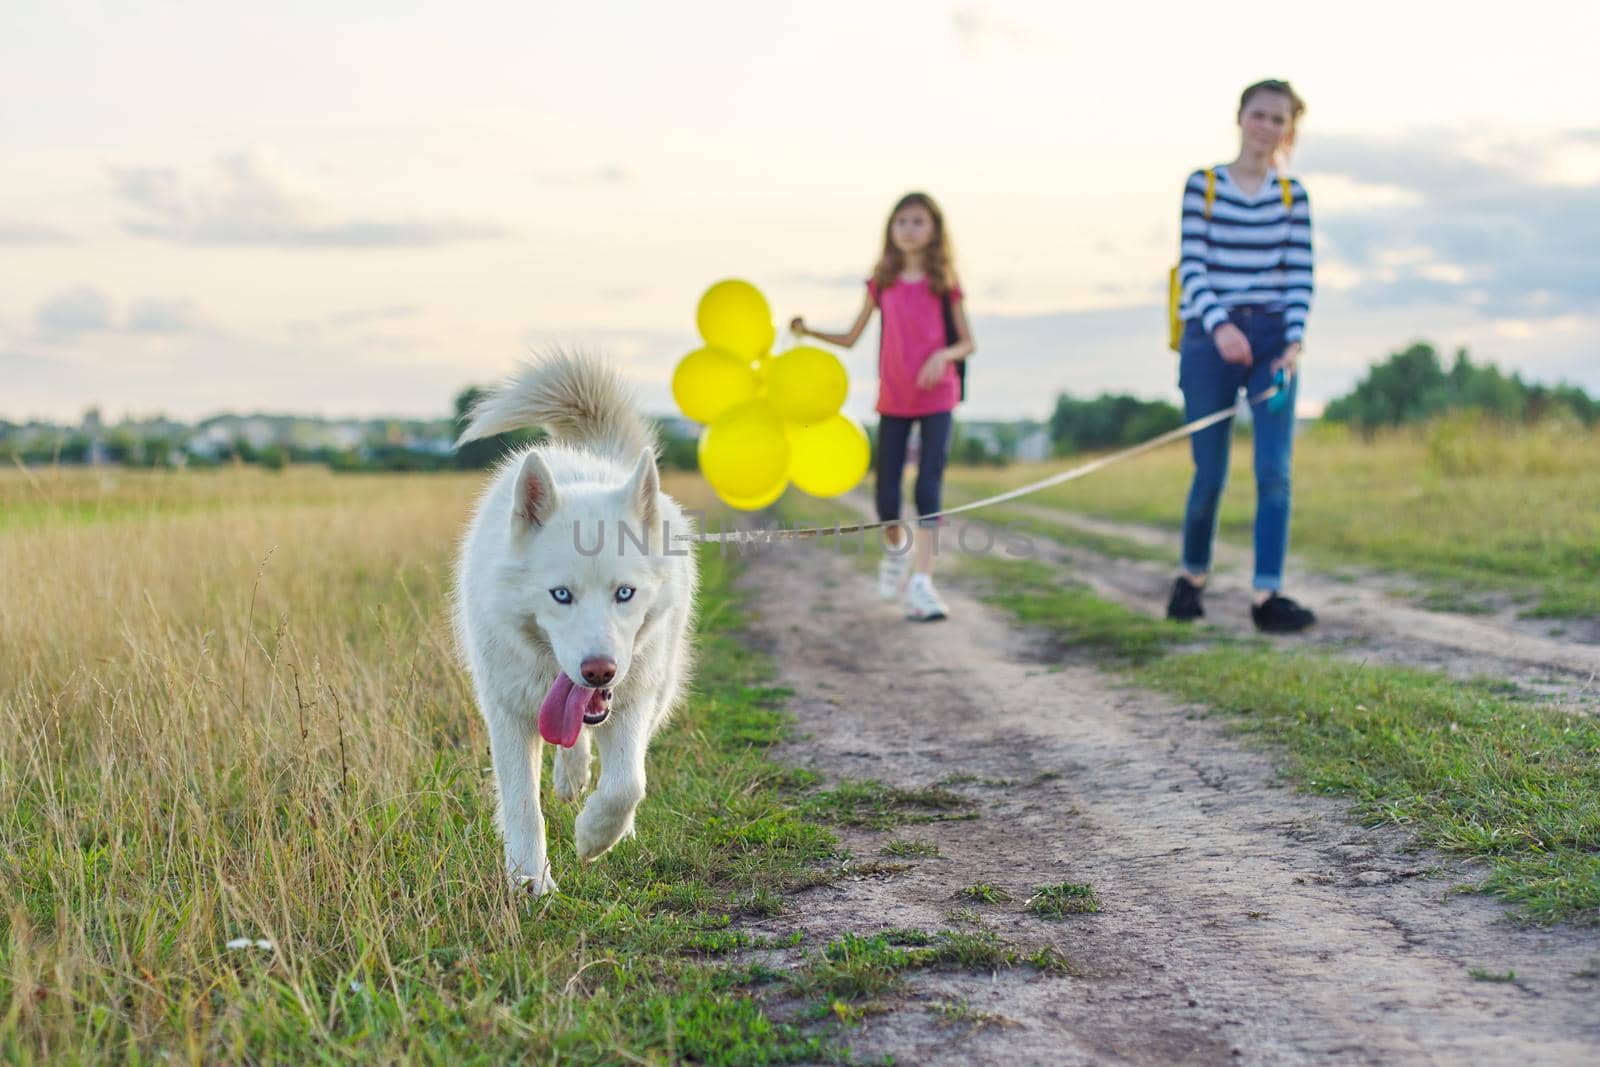 Children walking with dog in nature, girls with pet on country road on sunny summer day, child with yellow balloons